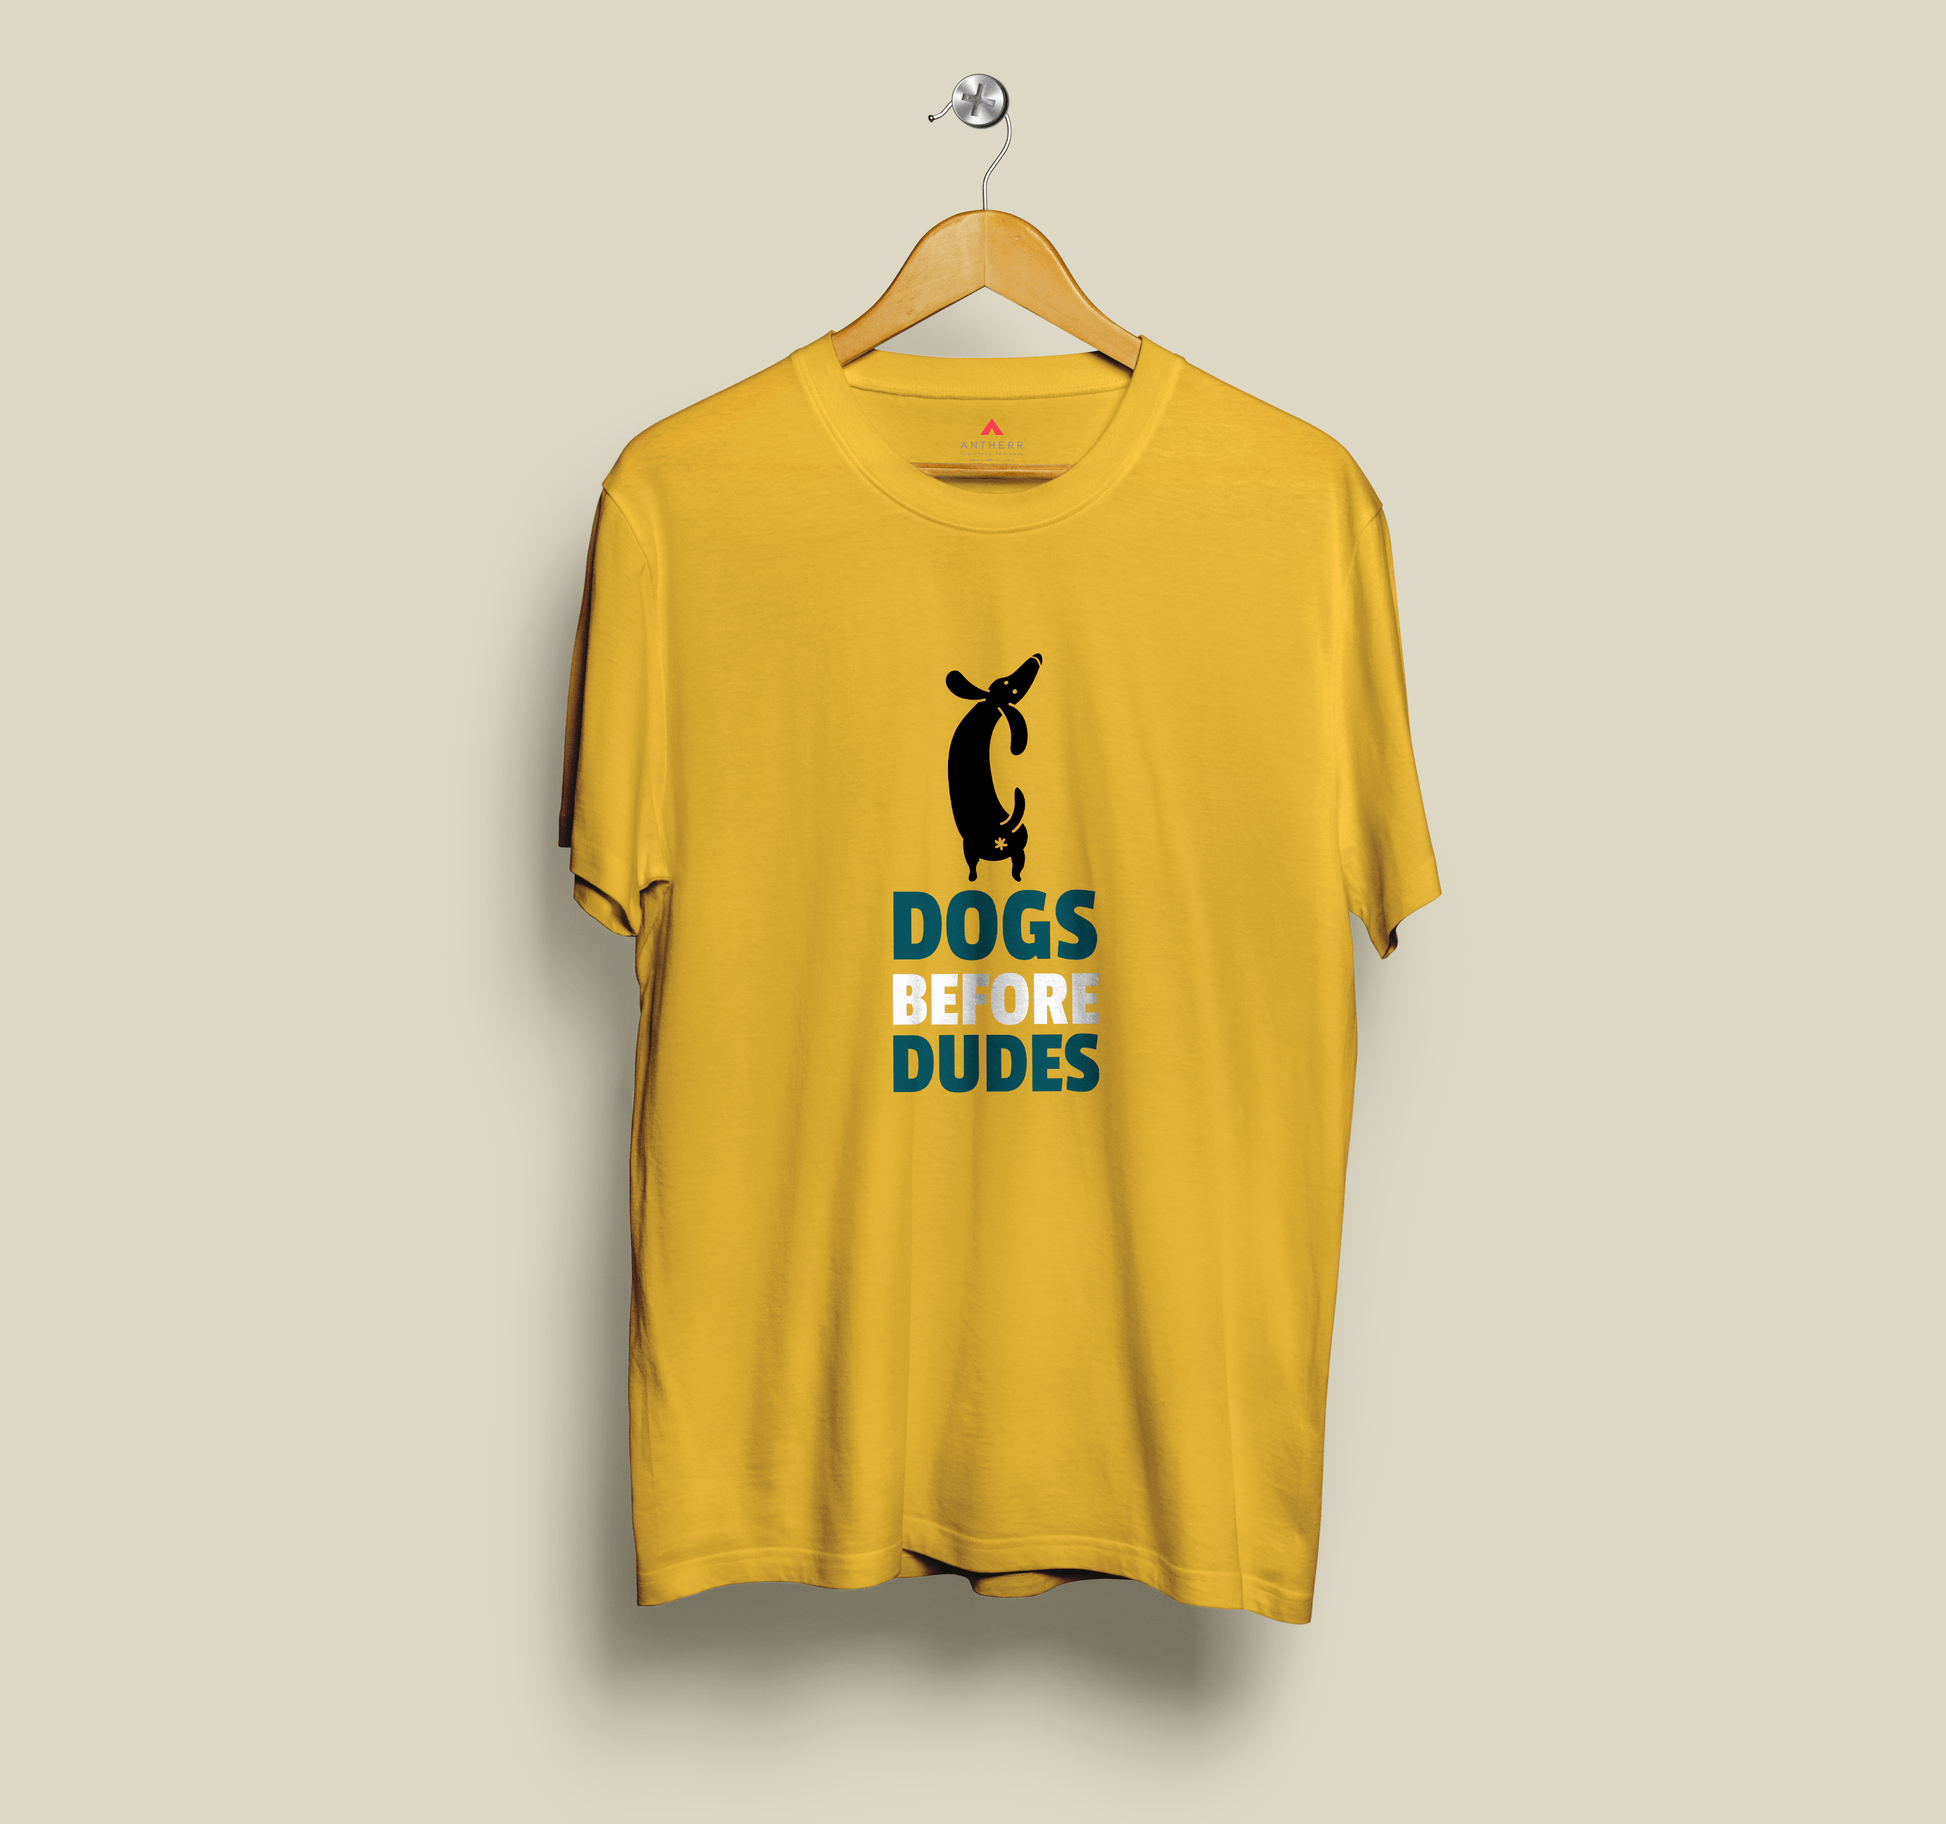 " DOGS BEFORE DUDES " - UNISEX HALF-SLEEVE T-SHIRTS